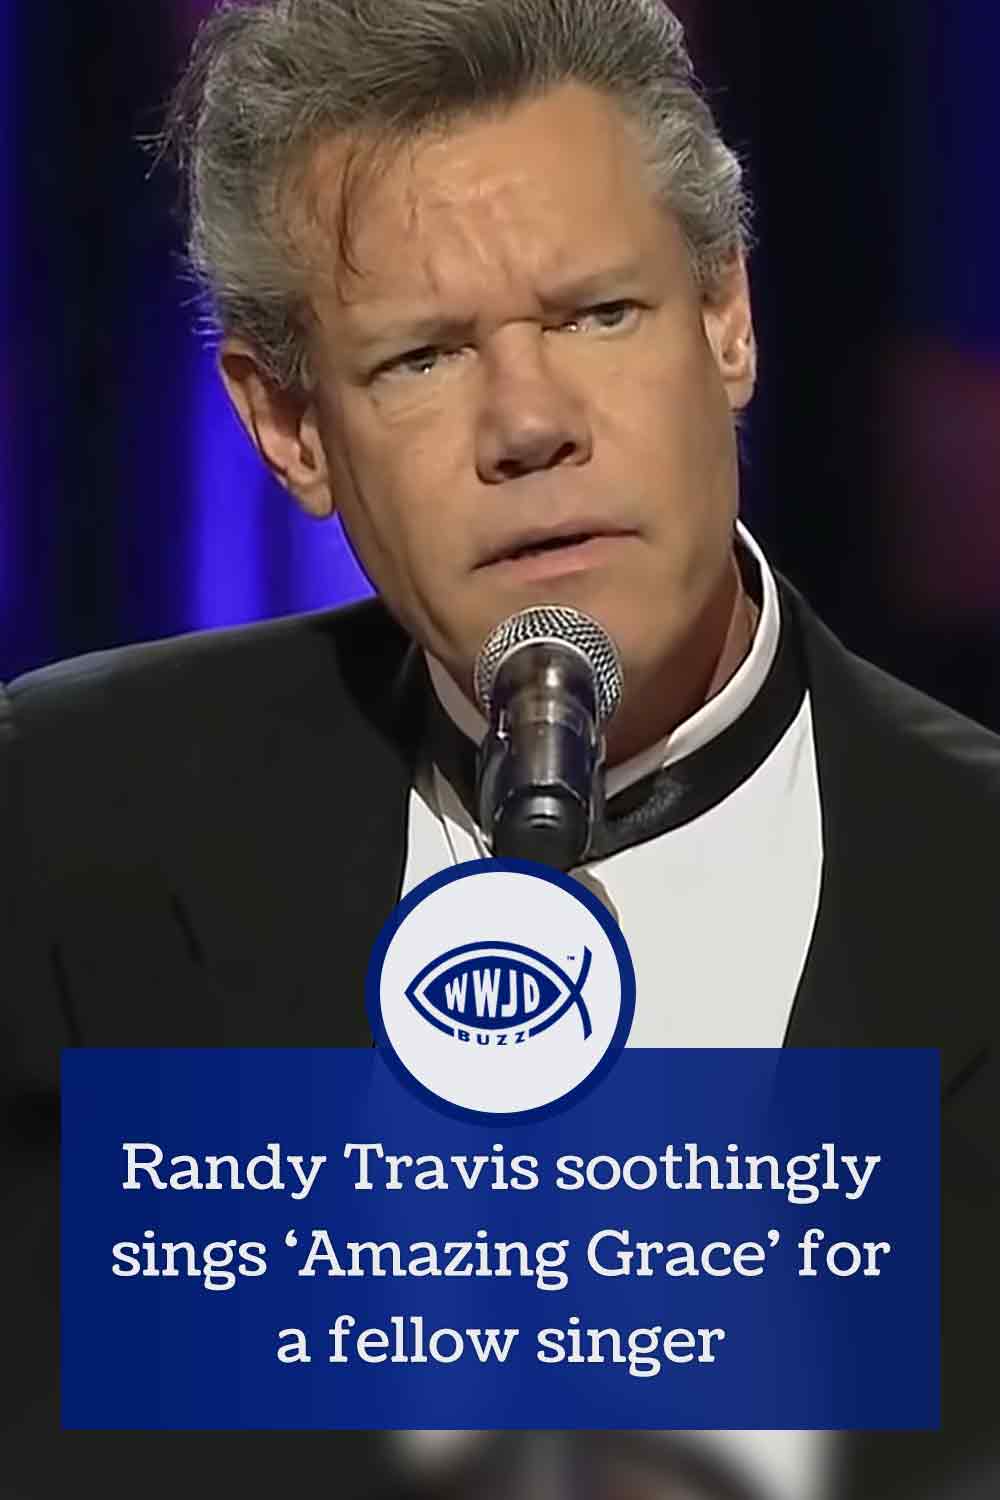 Randy Travis soothingly sings \'Amazing Grace\' for a fellow singer